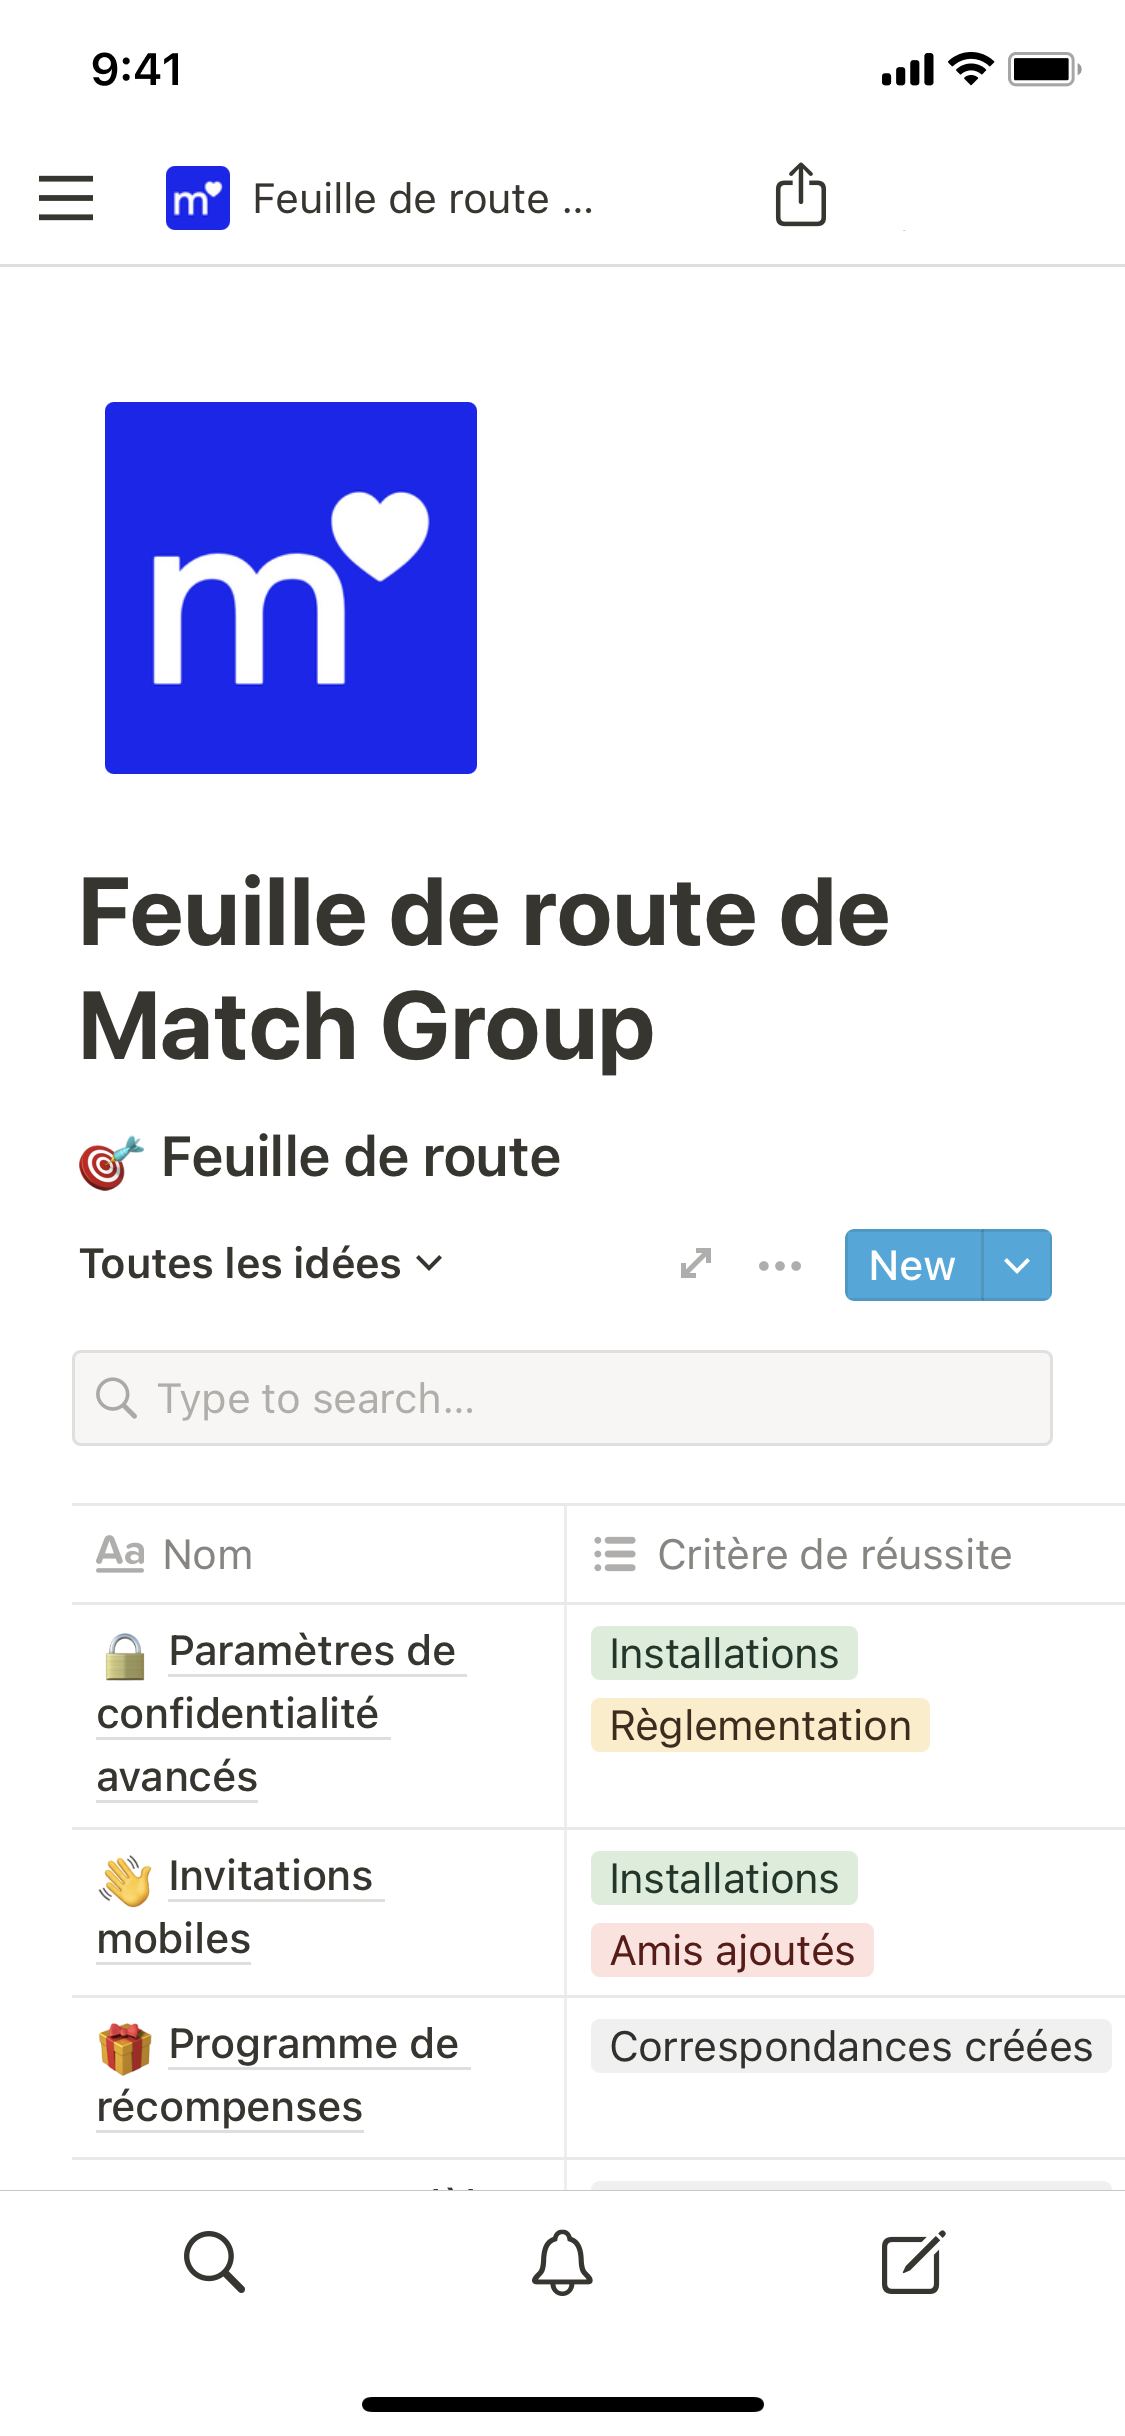 The mobile image for the Match Group's roadmap template